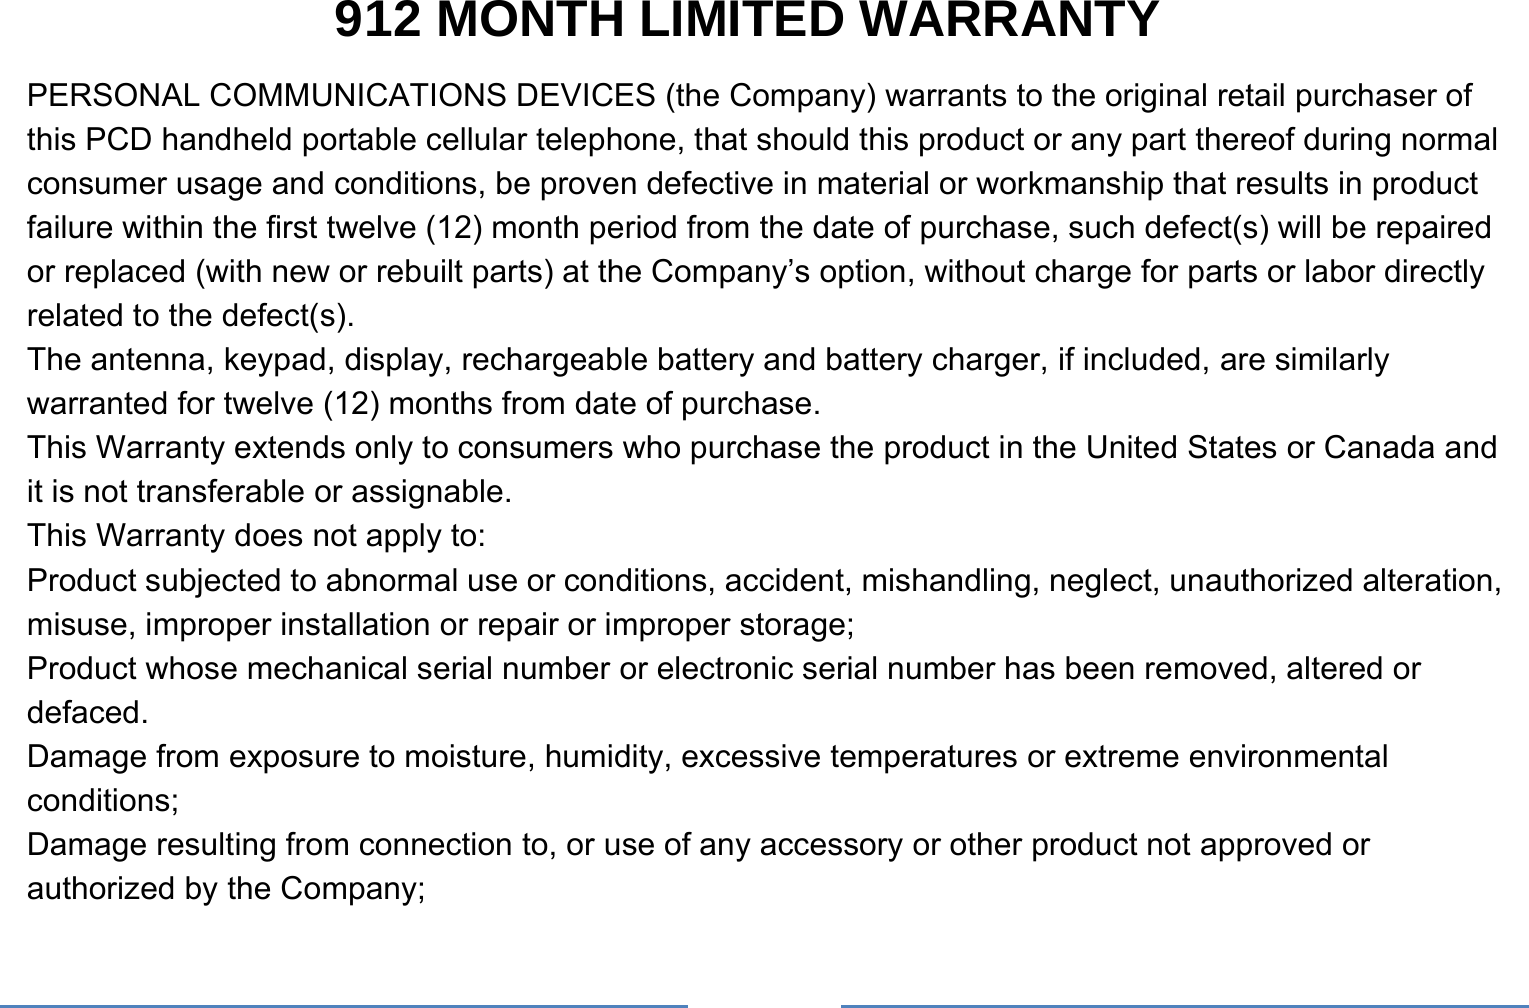     912 MONTH LIMITED WARRANTY PERSONAL COMMUNICATIONS DEVICES (the Company) warrants to the original retail purchaser of this PCD handheld portable cellular telephone, that should this product or any part thereof during normal consumer usage and conditions, be proven defective in material or workmanship that results in product failure within the first twelve (12) month period from the date of purchase, such defect(s) will be repaired or replaced (with new or rebuilt parts) at the Company’s option, without charge for parts or labor directly related to the defect(s). The antenna, keypad, display, rechargeable battery and battery charger, if included, are similarly warranted for twelve (12) months from date of purchase.     This Warranty extends only to consumers who purchase the product in the United States or Canada and it is not transferable or assignable. This Warranty does not apply to: Product subjected to abnormal use or conditions, accident, mishandling, neglect, unauthorized alteration, misuse, improper installation or repair or improper storage; Product whose mechanical serial number or electronic serial number has been removed, altered or defaced. Damage from exposure to moisture, humidity, excessive temperatures or extreme environmental conditions; Damage resulting from connection to, or use of any accessory or other product not approved or authorized by the Company; 